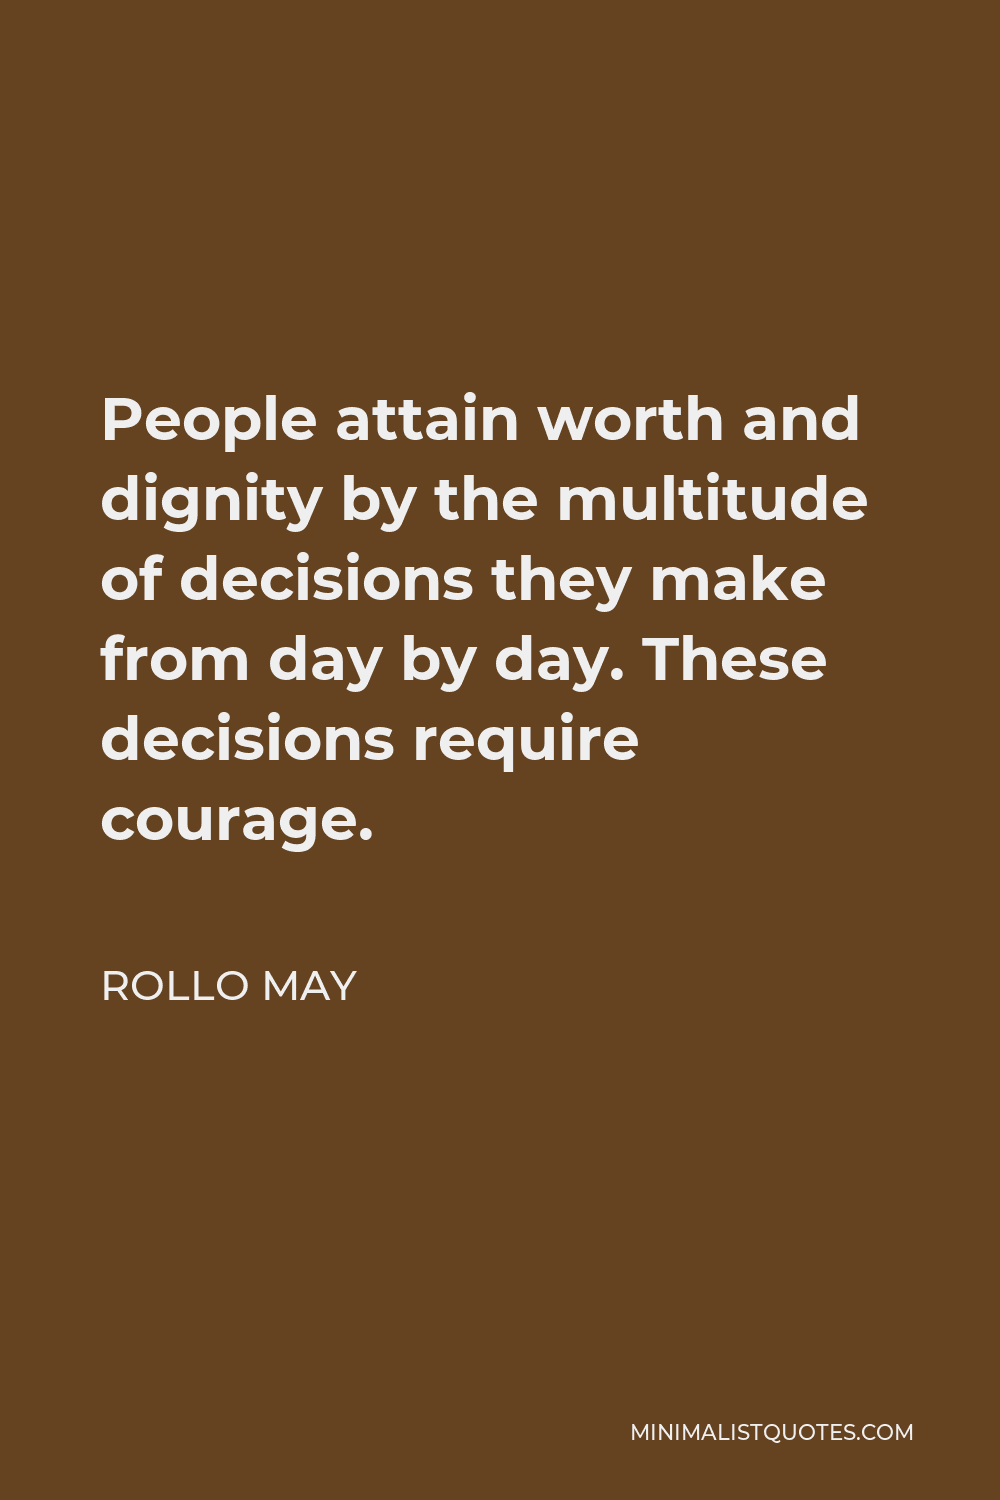 Rollo May Quote - People attain worth and dignity by the multitude of decisions they make from day by day. These decisions require courage.